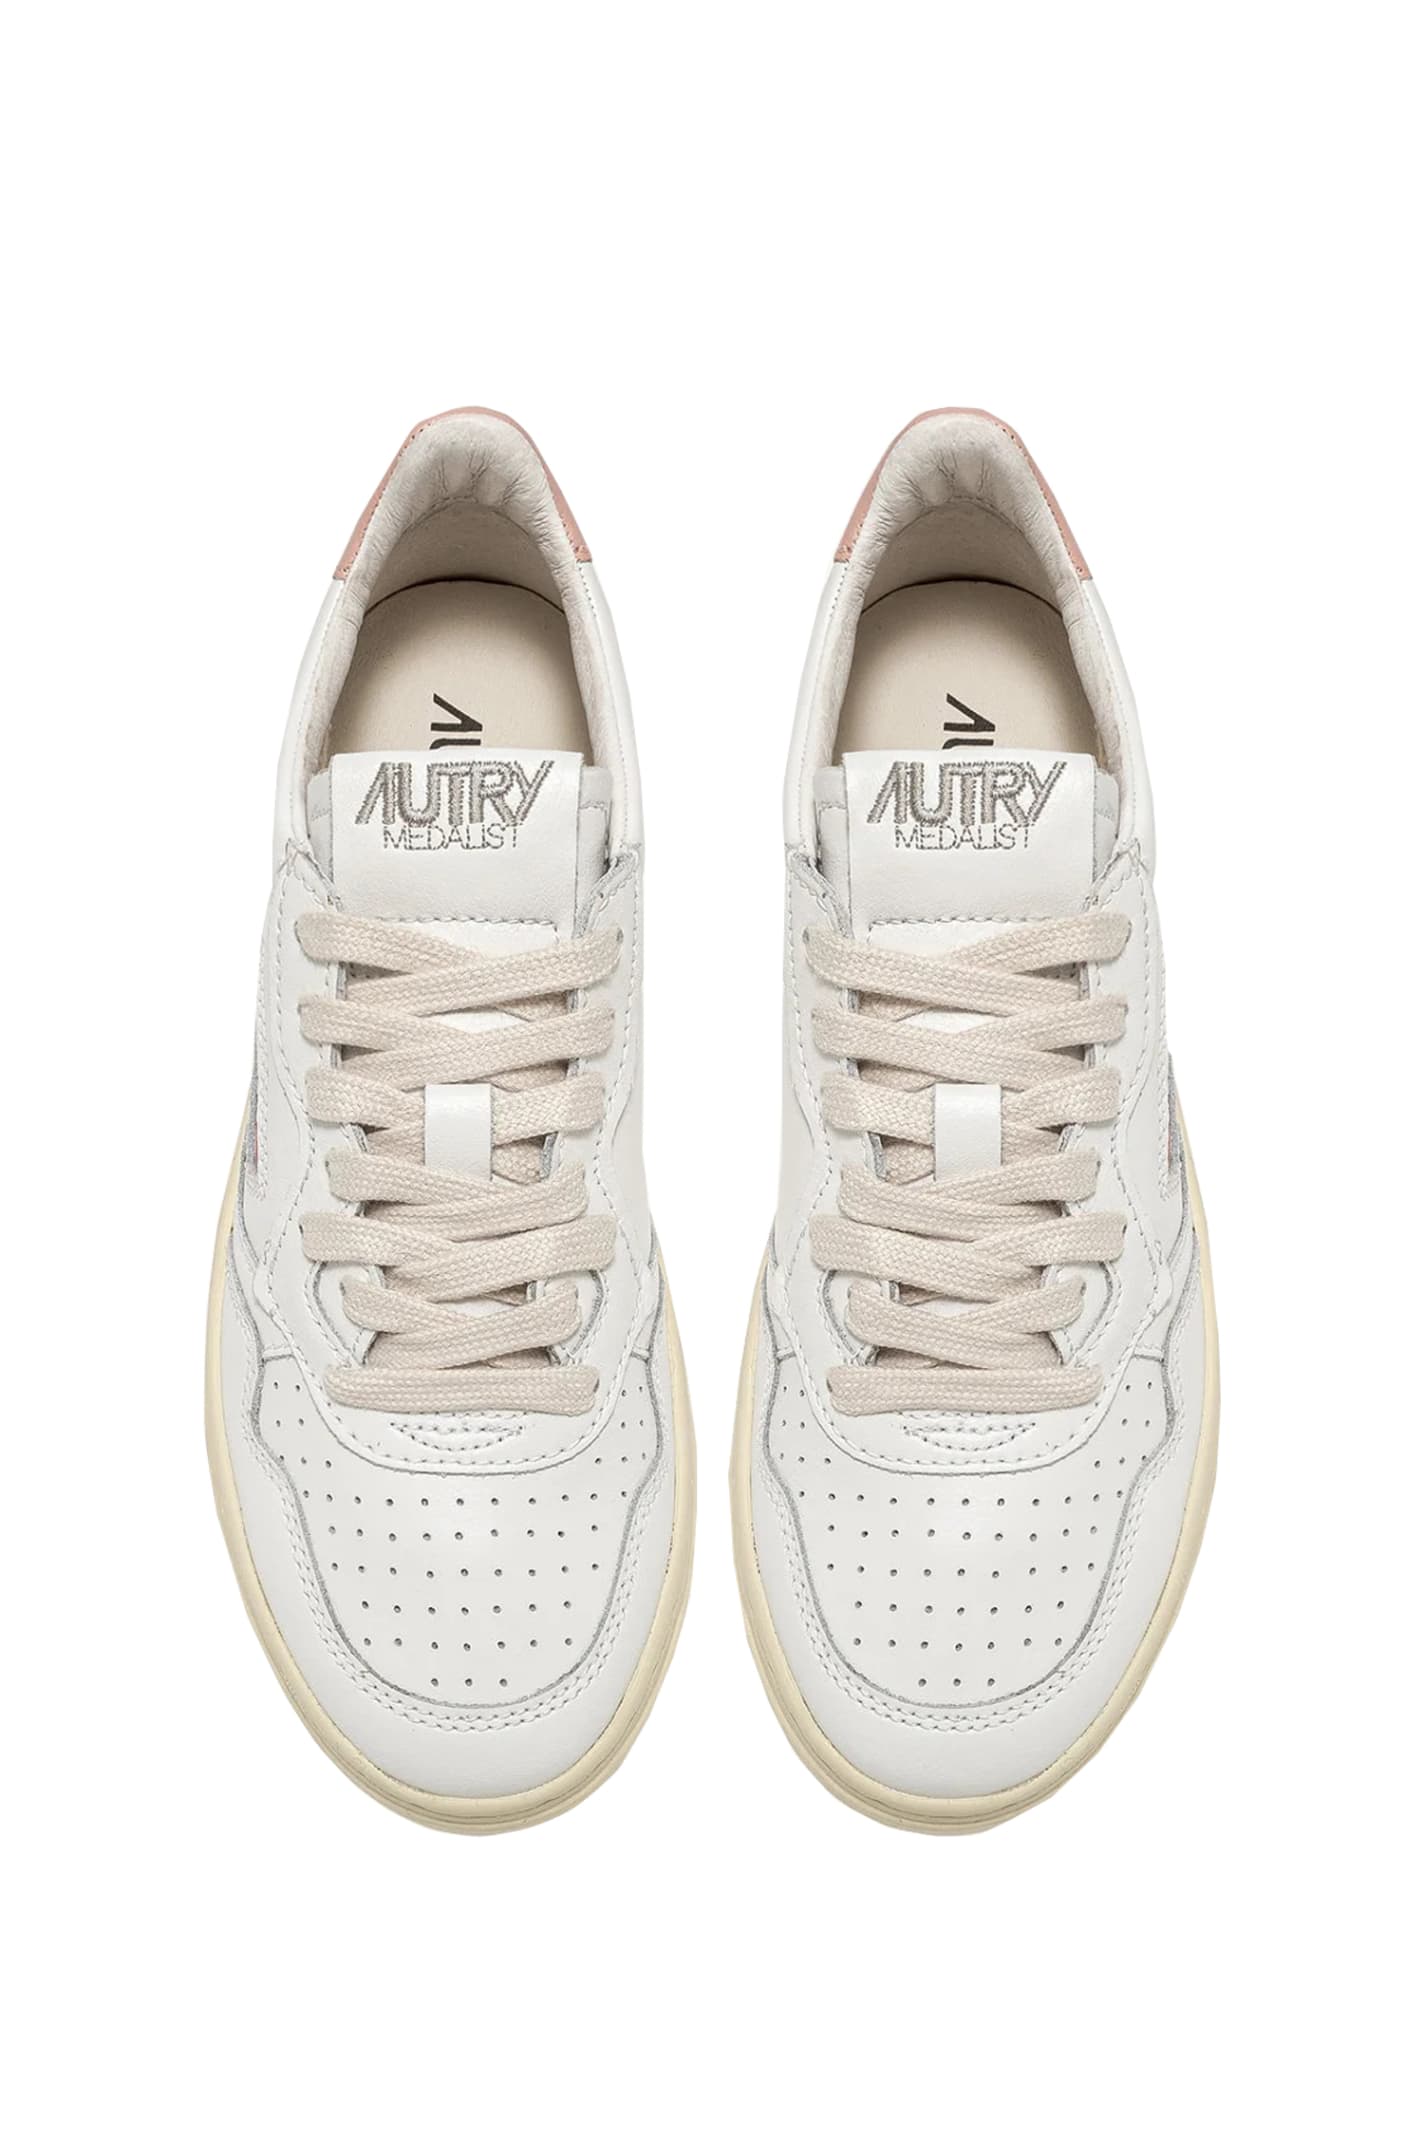 Shop Autry Medalist Low In Pink